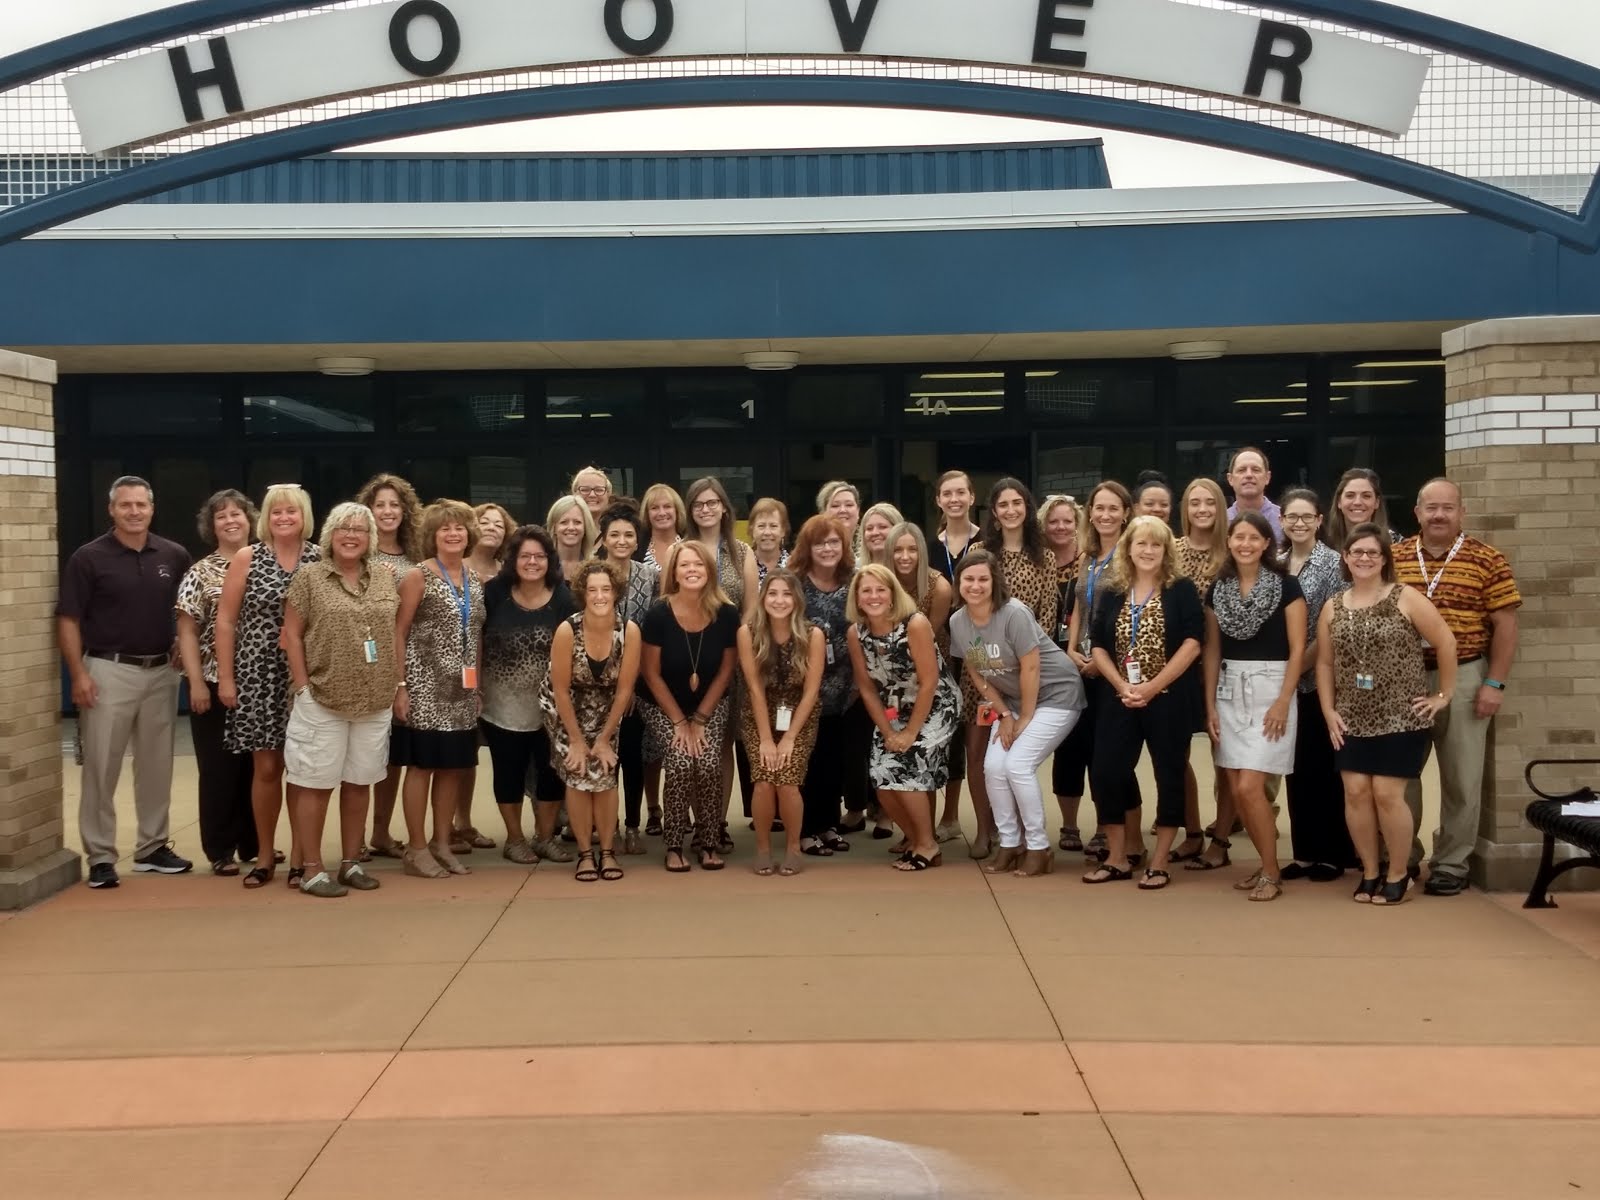 Hoover Staff